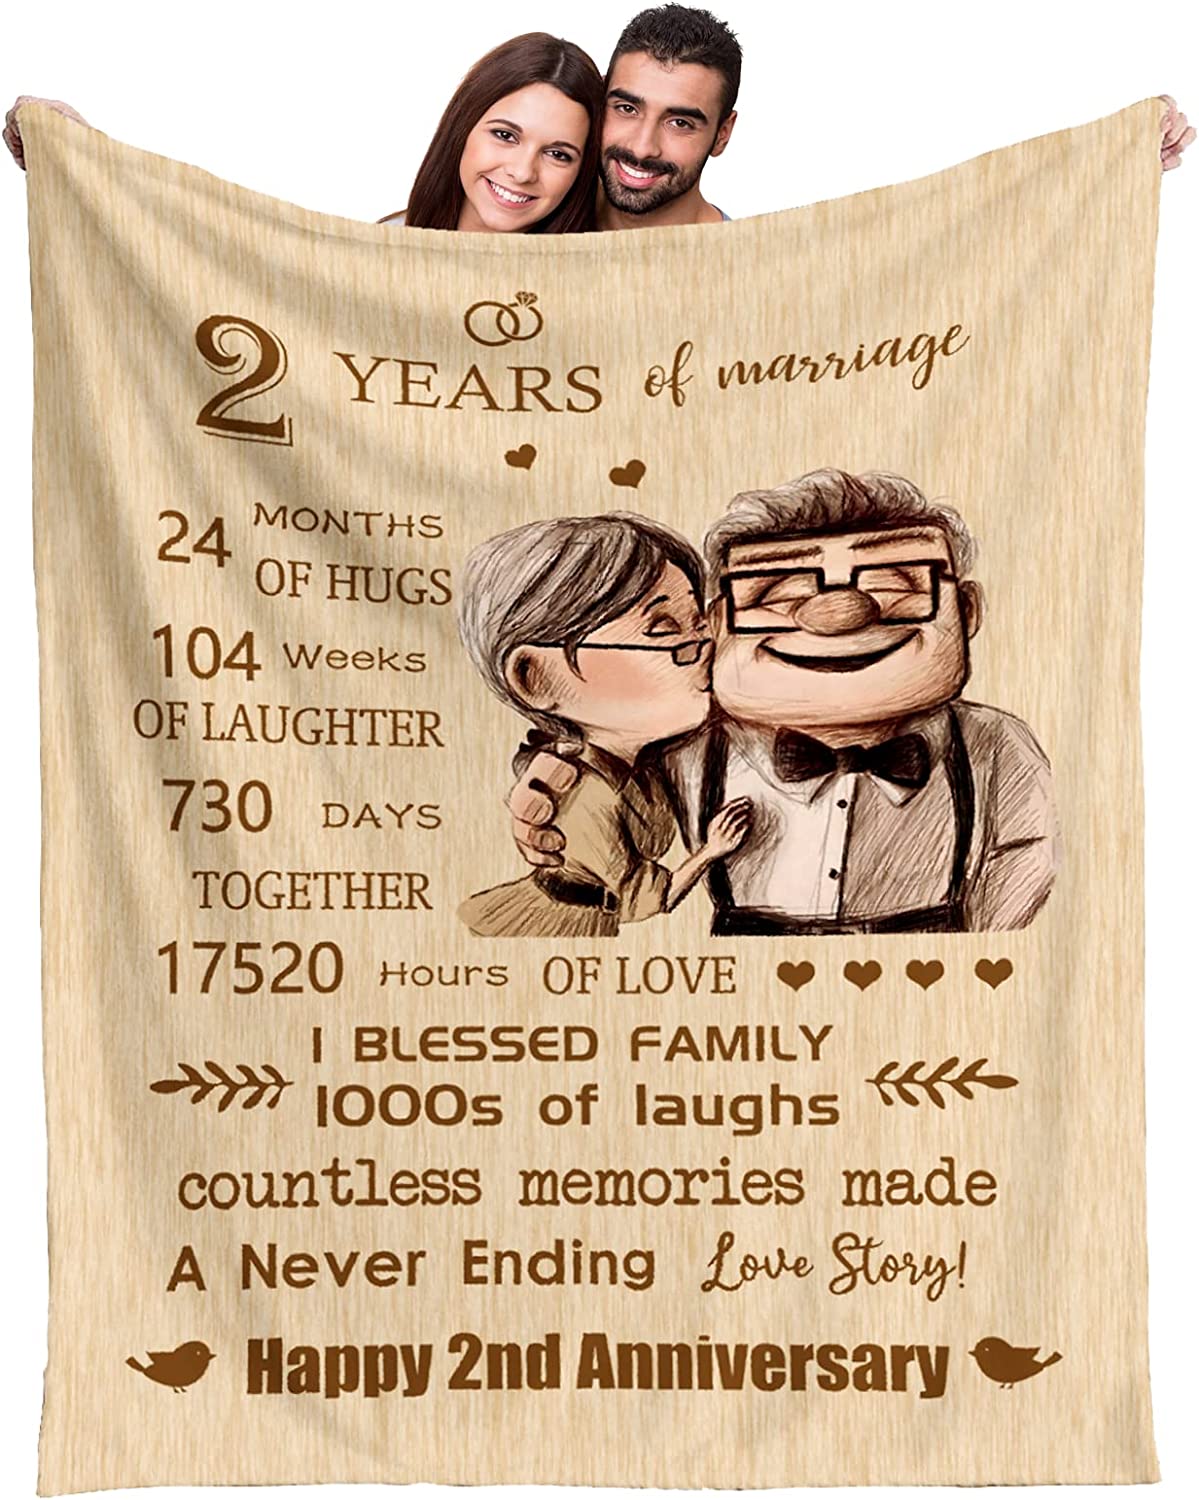 Personalized 25th Anniversary Gift for Parents Anniversary Gift, Marriage  Stats Story, 25th Wedding Anniversary Gift for Couples Gift - Etsy | Diy anniversary  gift, 25th anniversary gifts, Traditional anniversary gifts